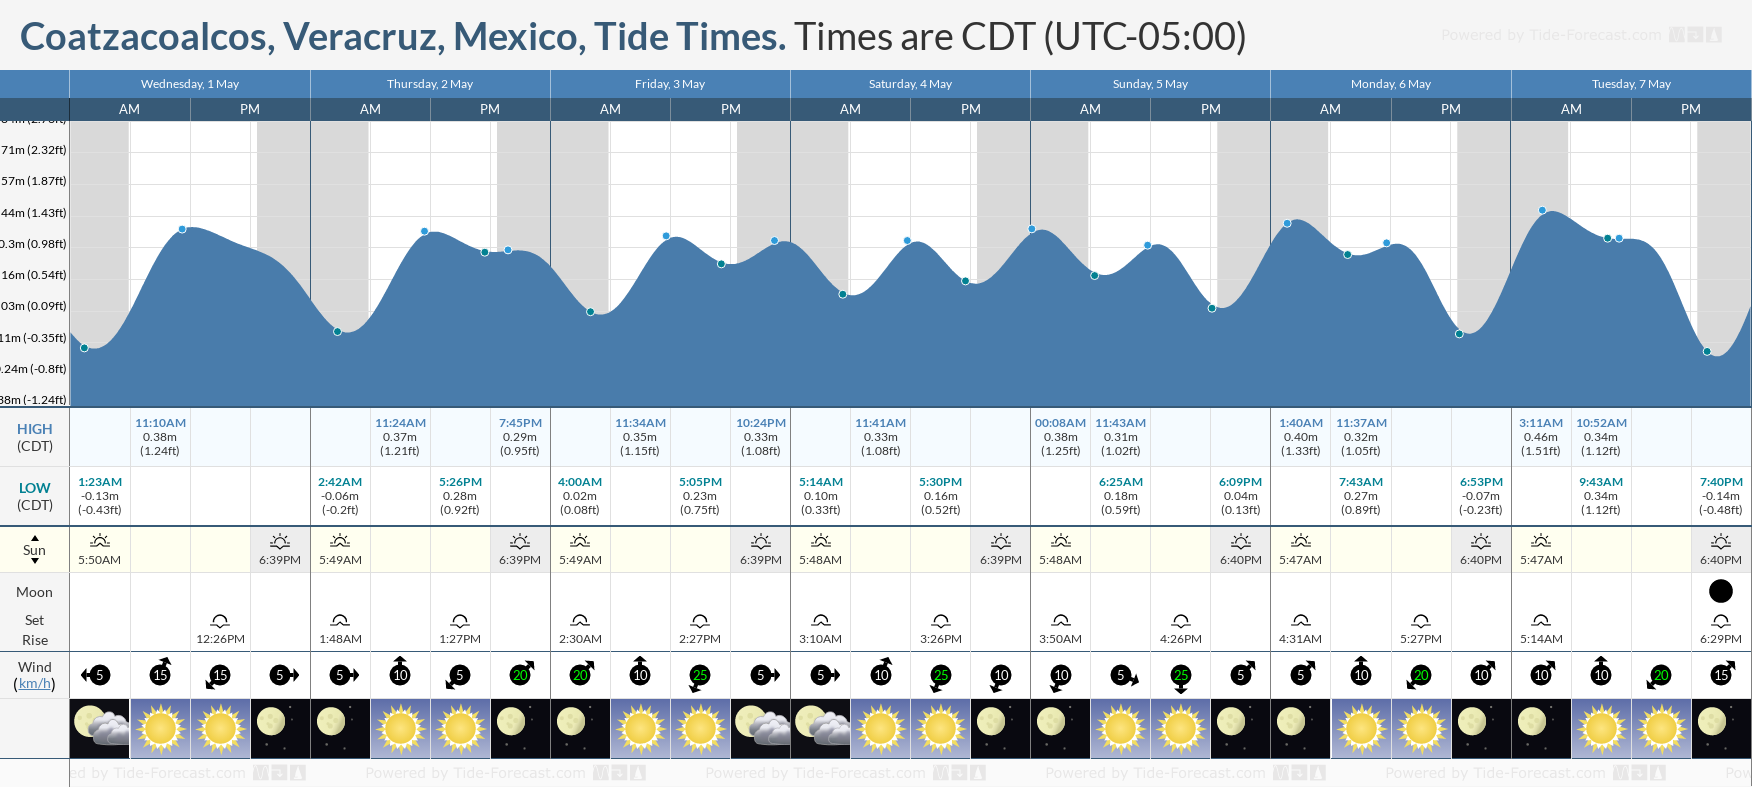 Coatzacoalcos, Veracruz, Mexico Tide Chart including high and low tide tide times for the next 7 days